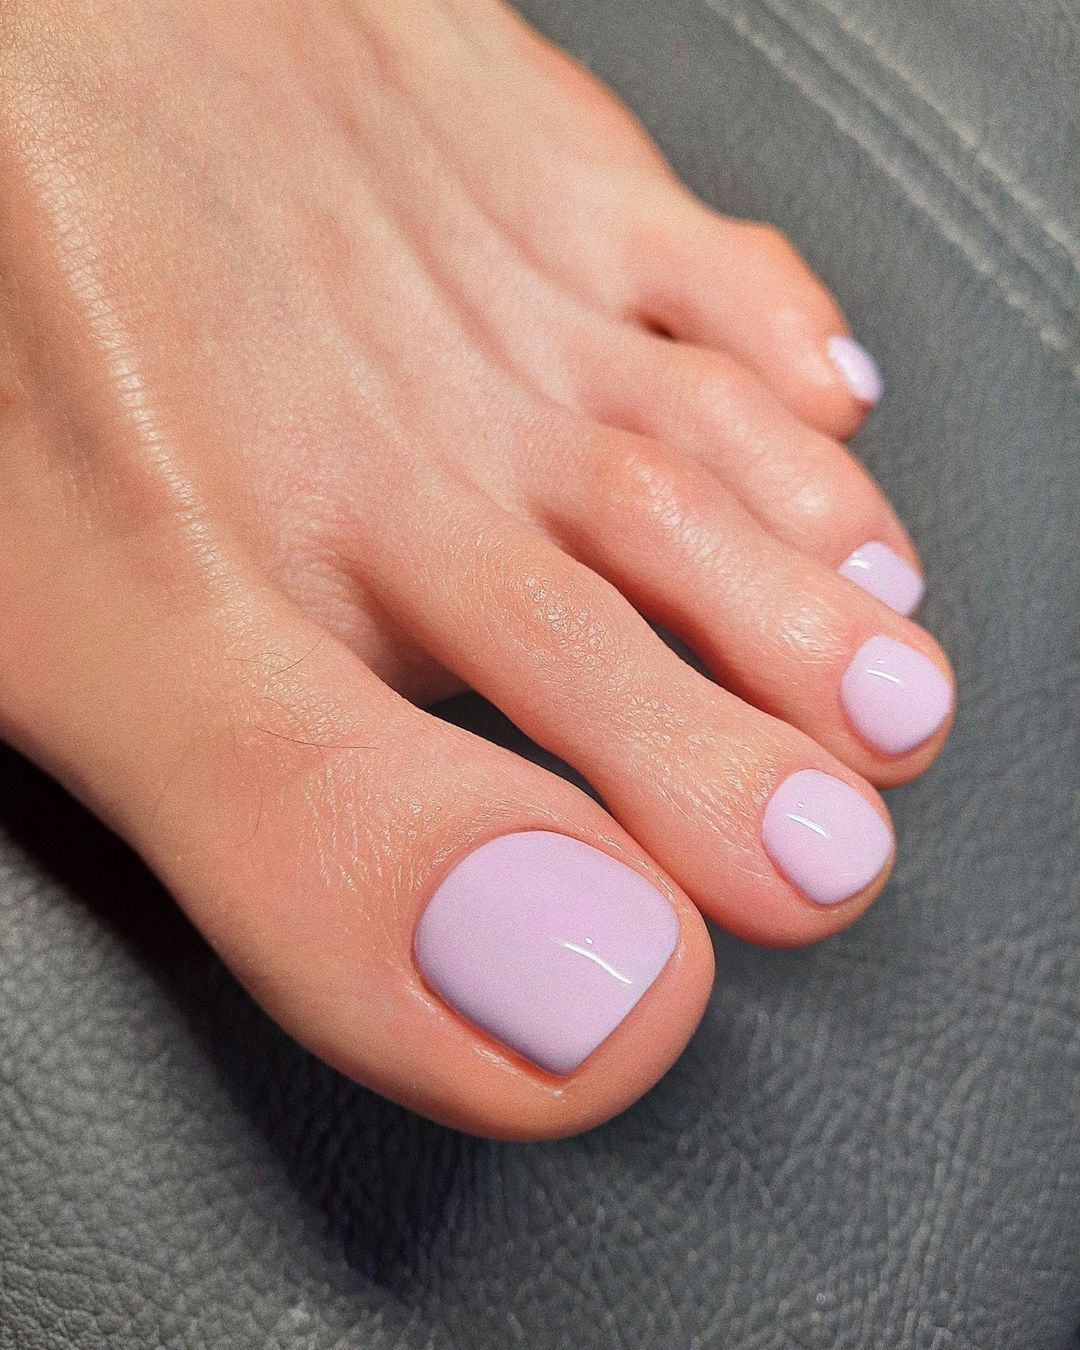 Fashionable pedicure for the summer: 6 colors chosen by stylish women